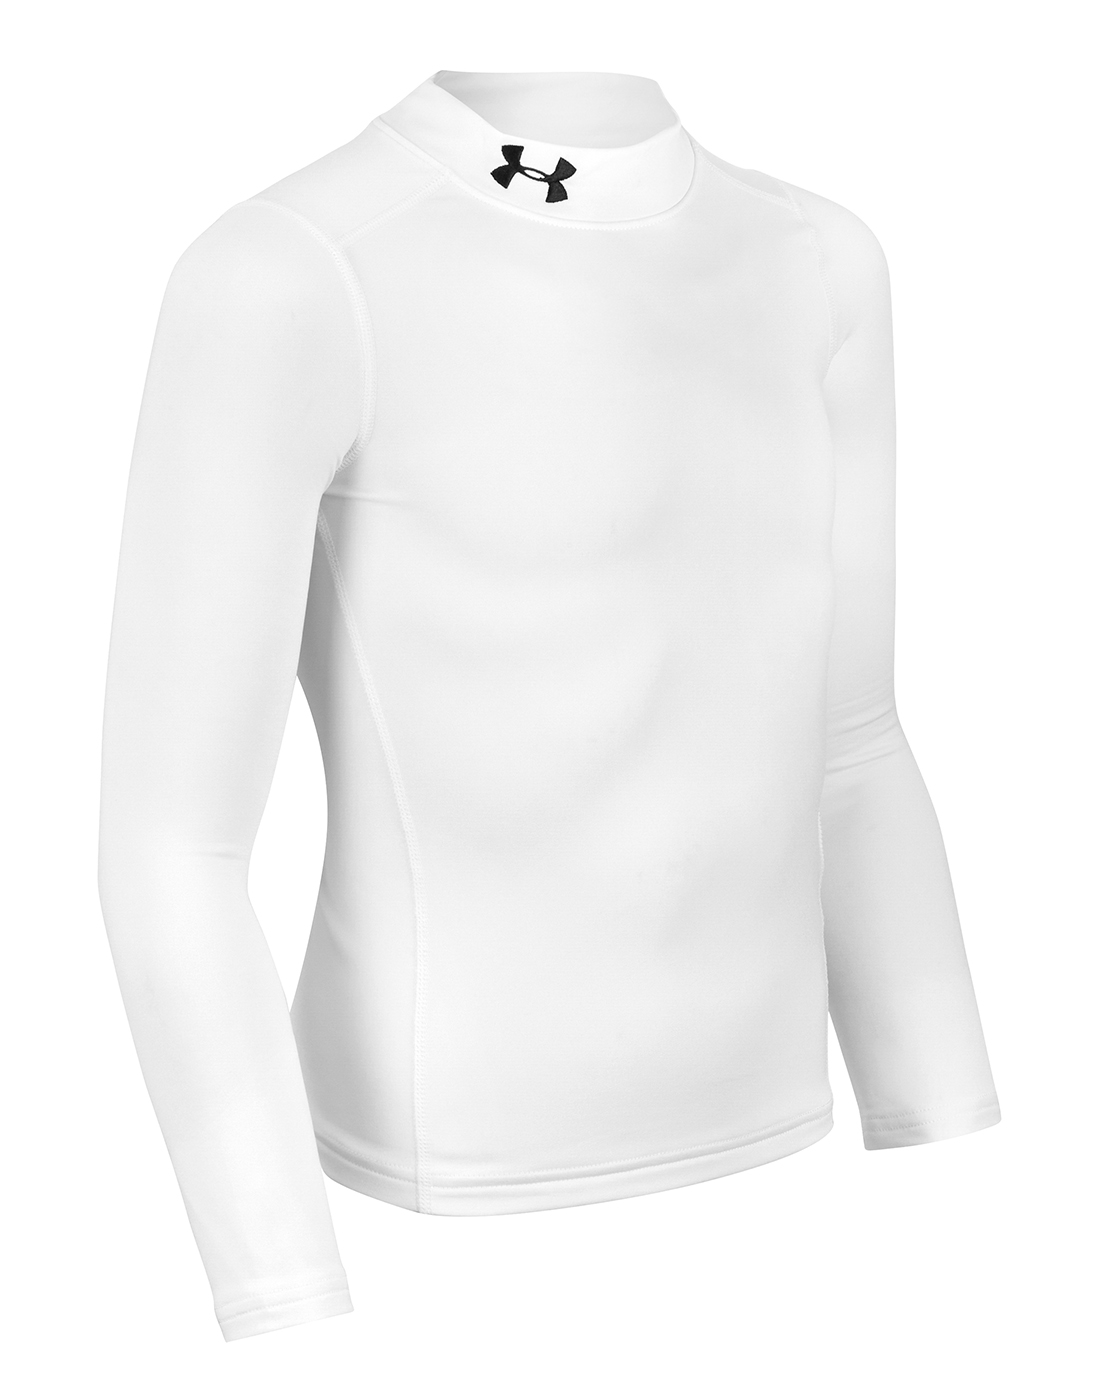 under armour cold base layer